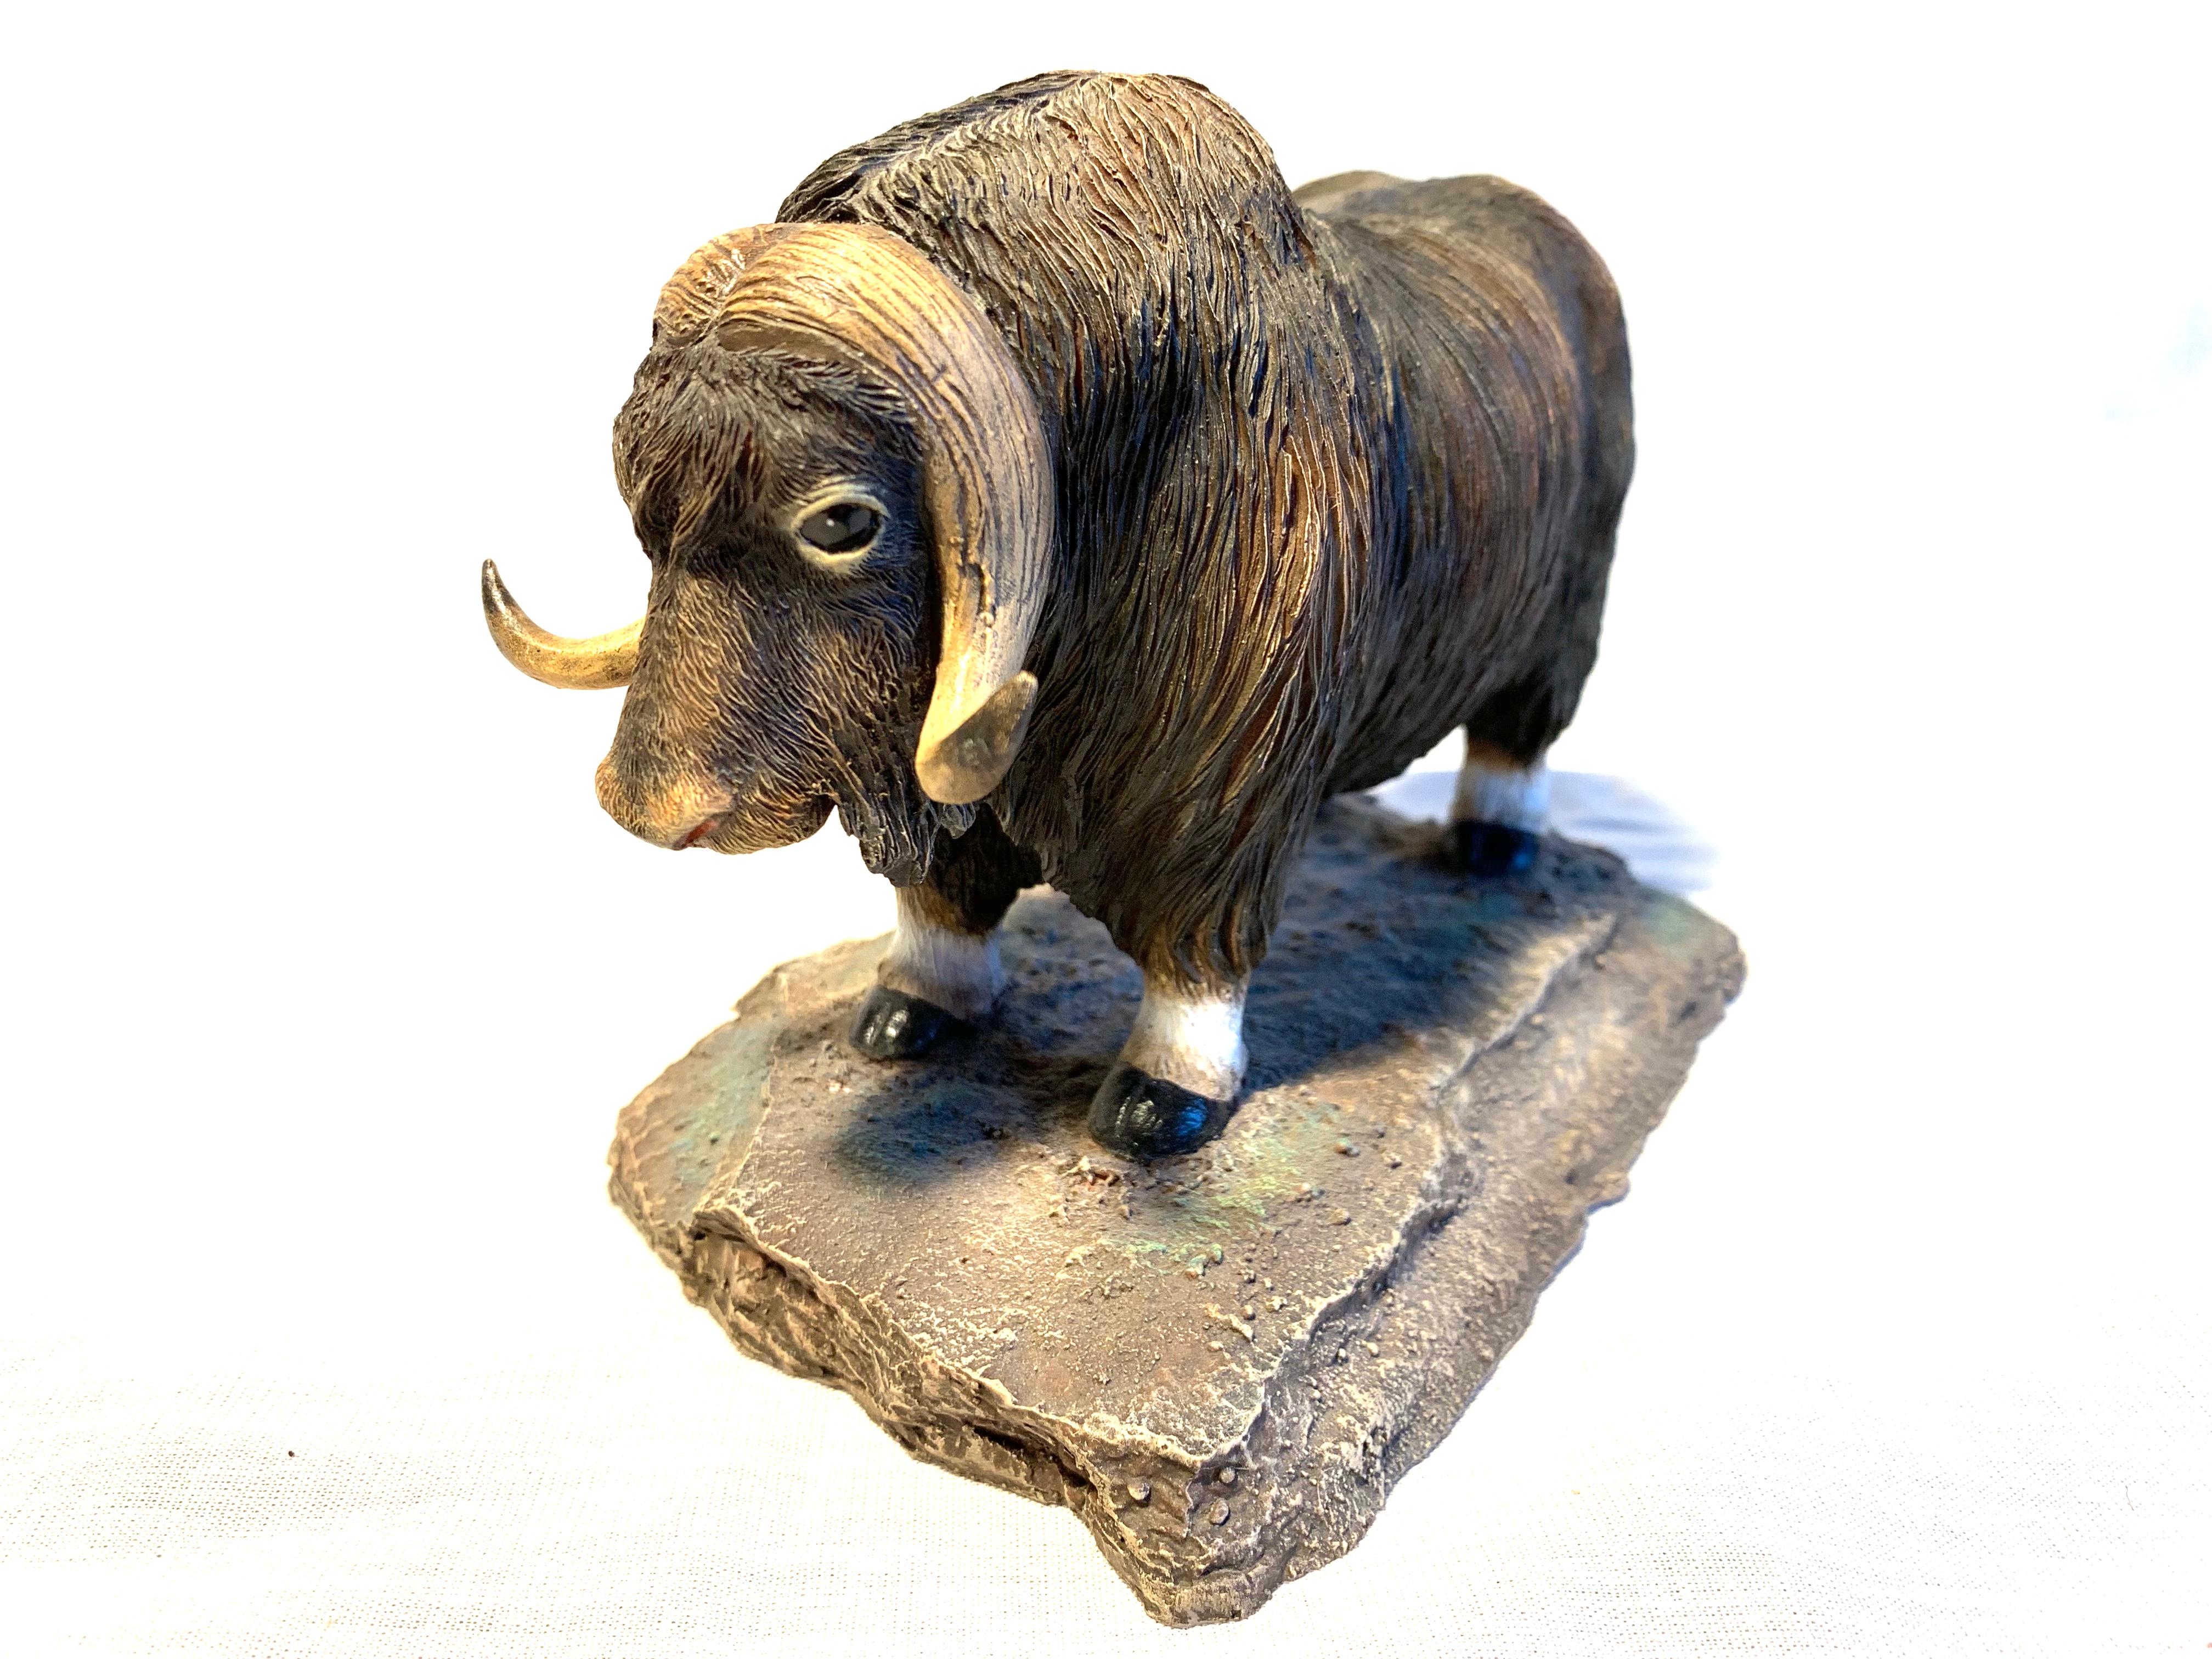 This is a rare handcrafted and hand painted Royal Scandinavian musk ox sculpture.